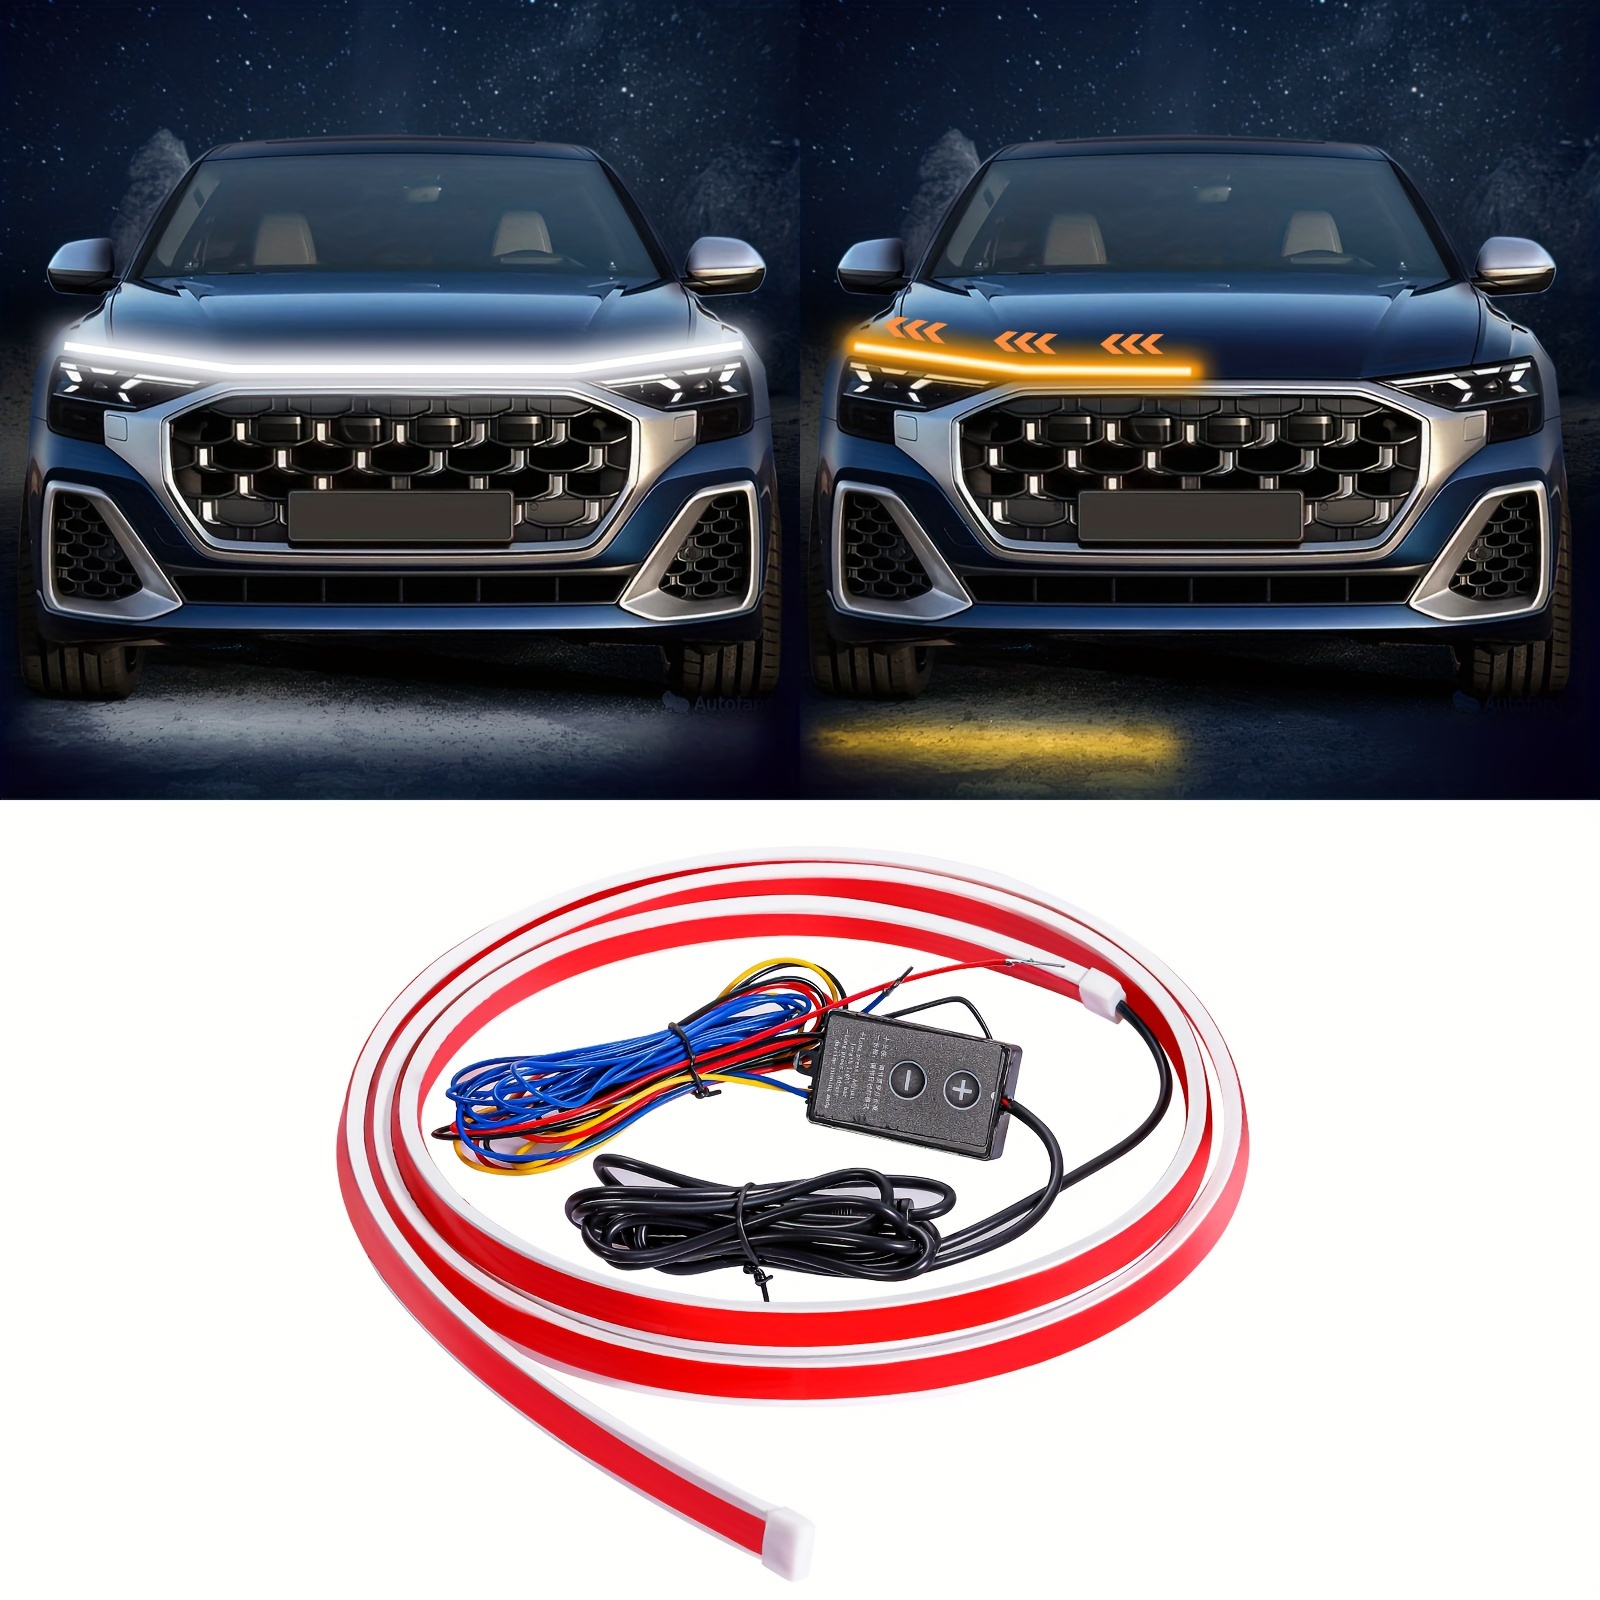 

Flexible Car Hood Light Strip, 70 In Dynamic Led Car Strip Lights, White&amber Sequential Lights For Car, Truck, Suv